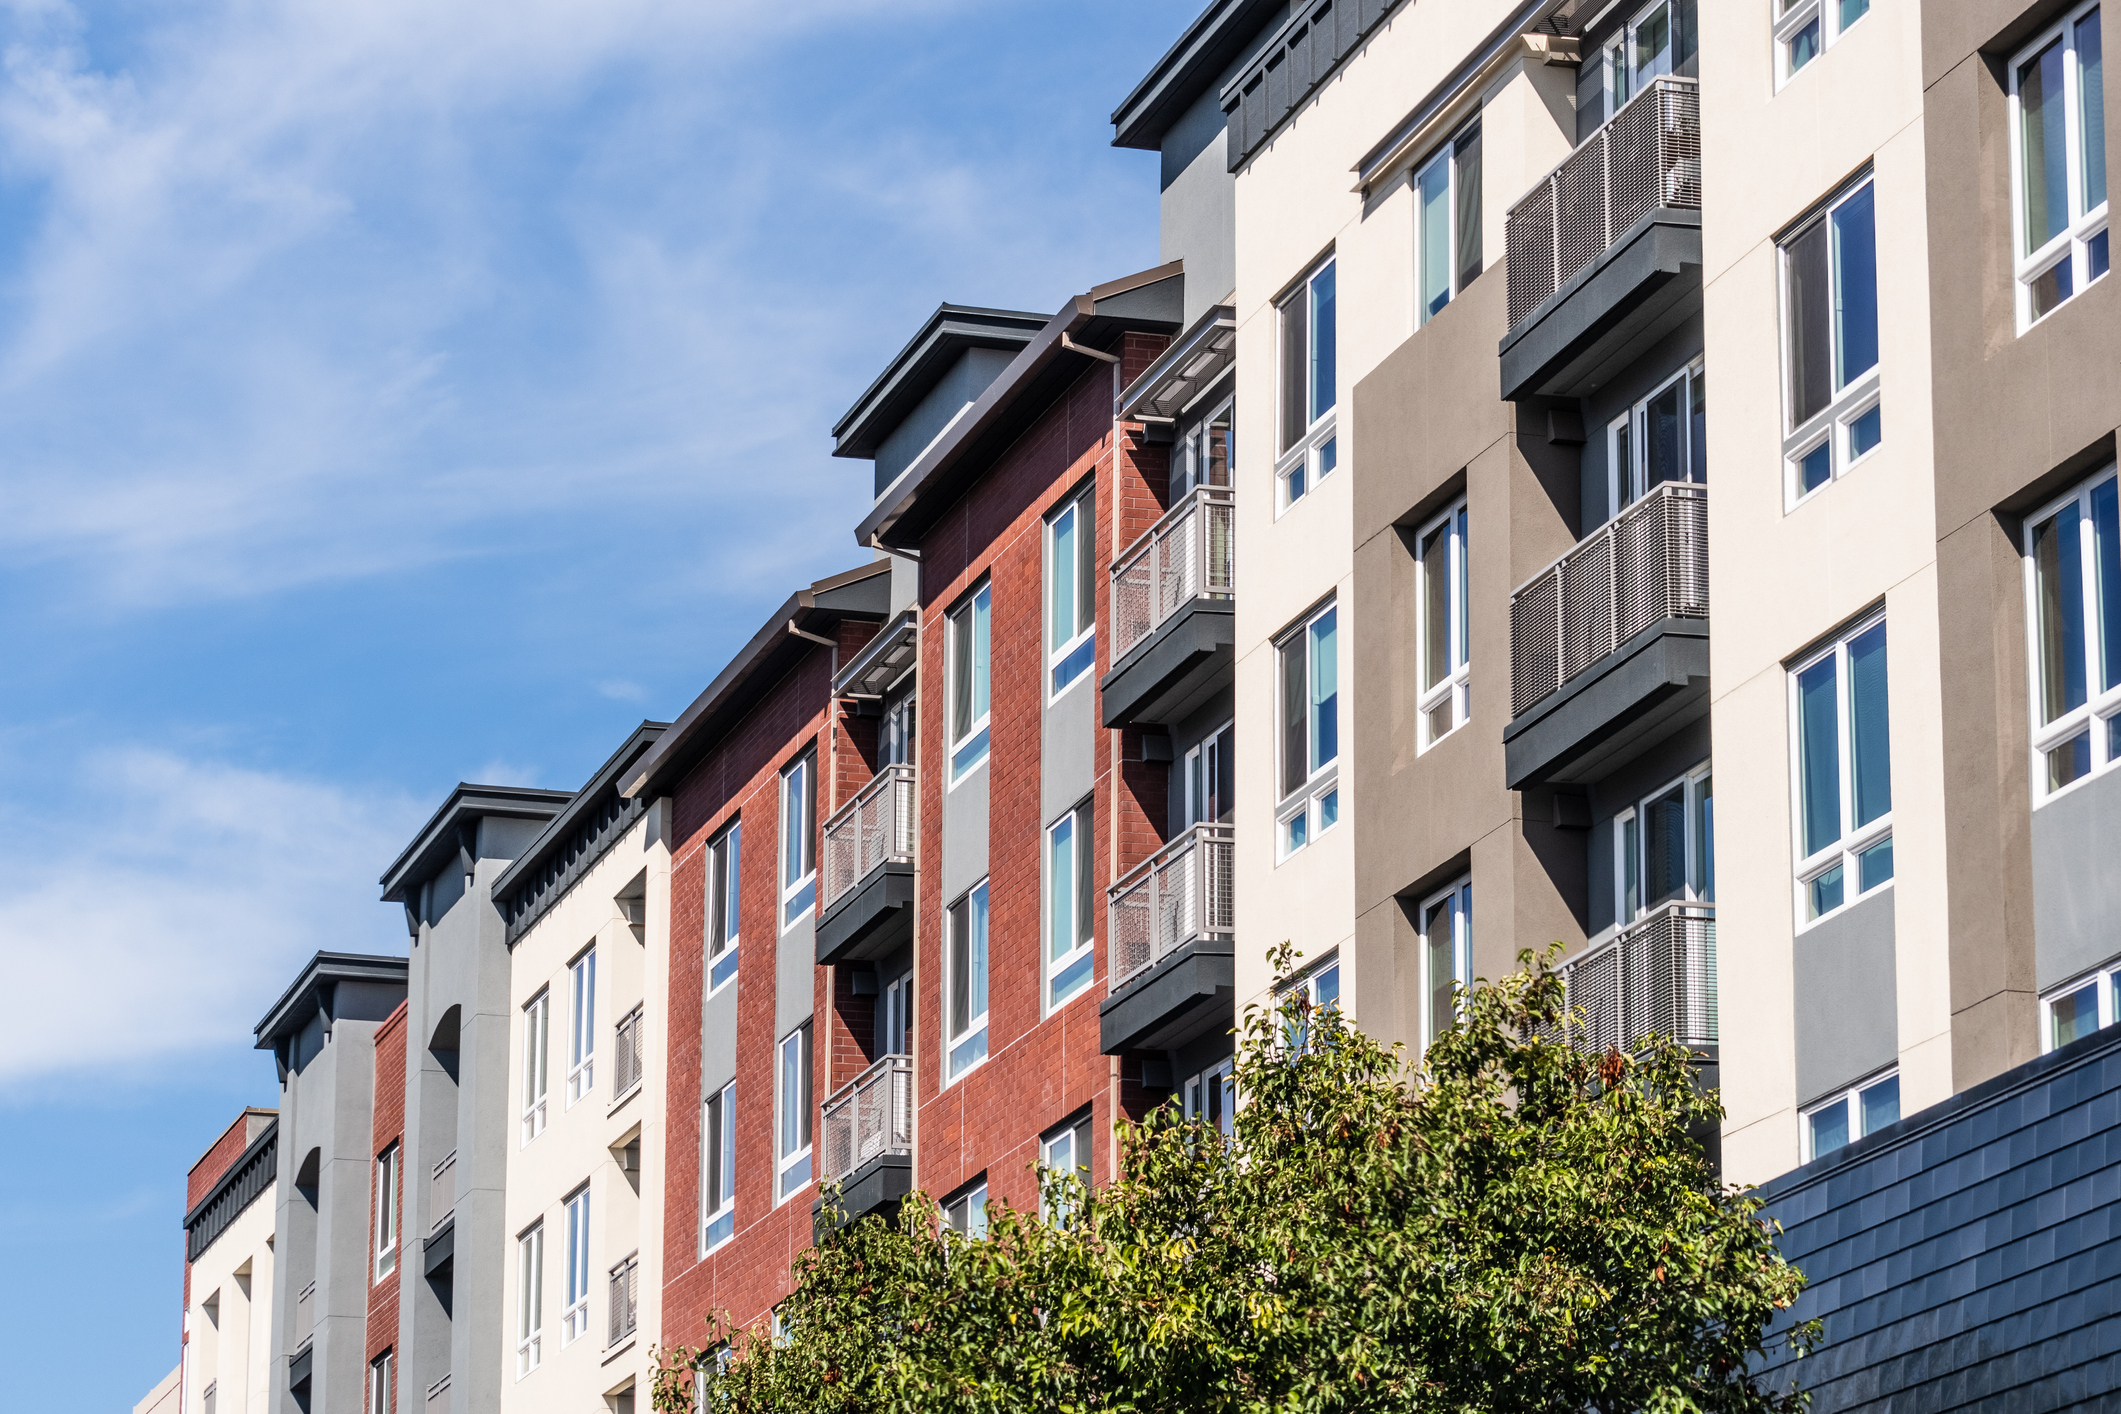 Is Low-Income Housing the Same as Section 8?